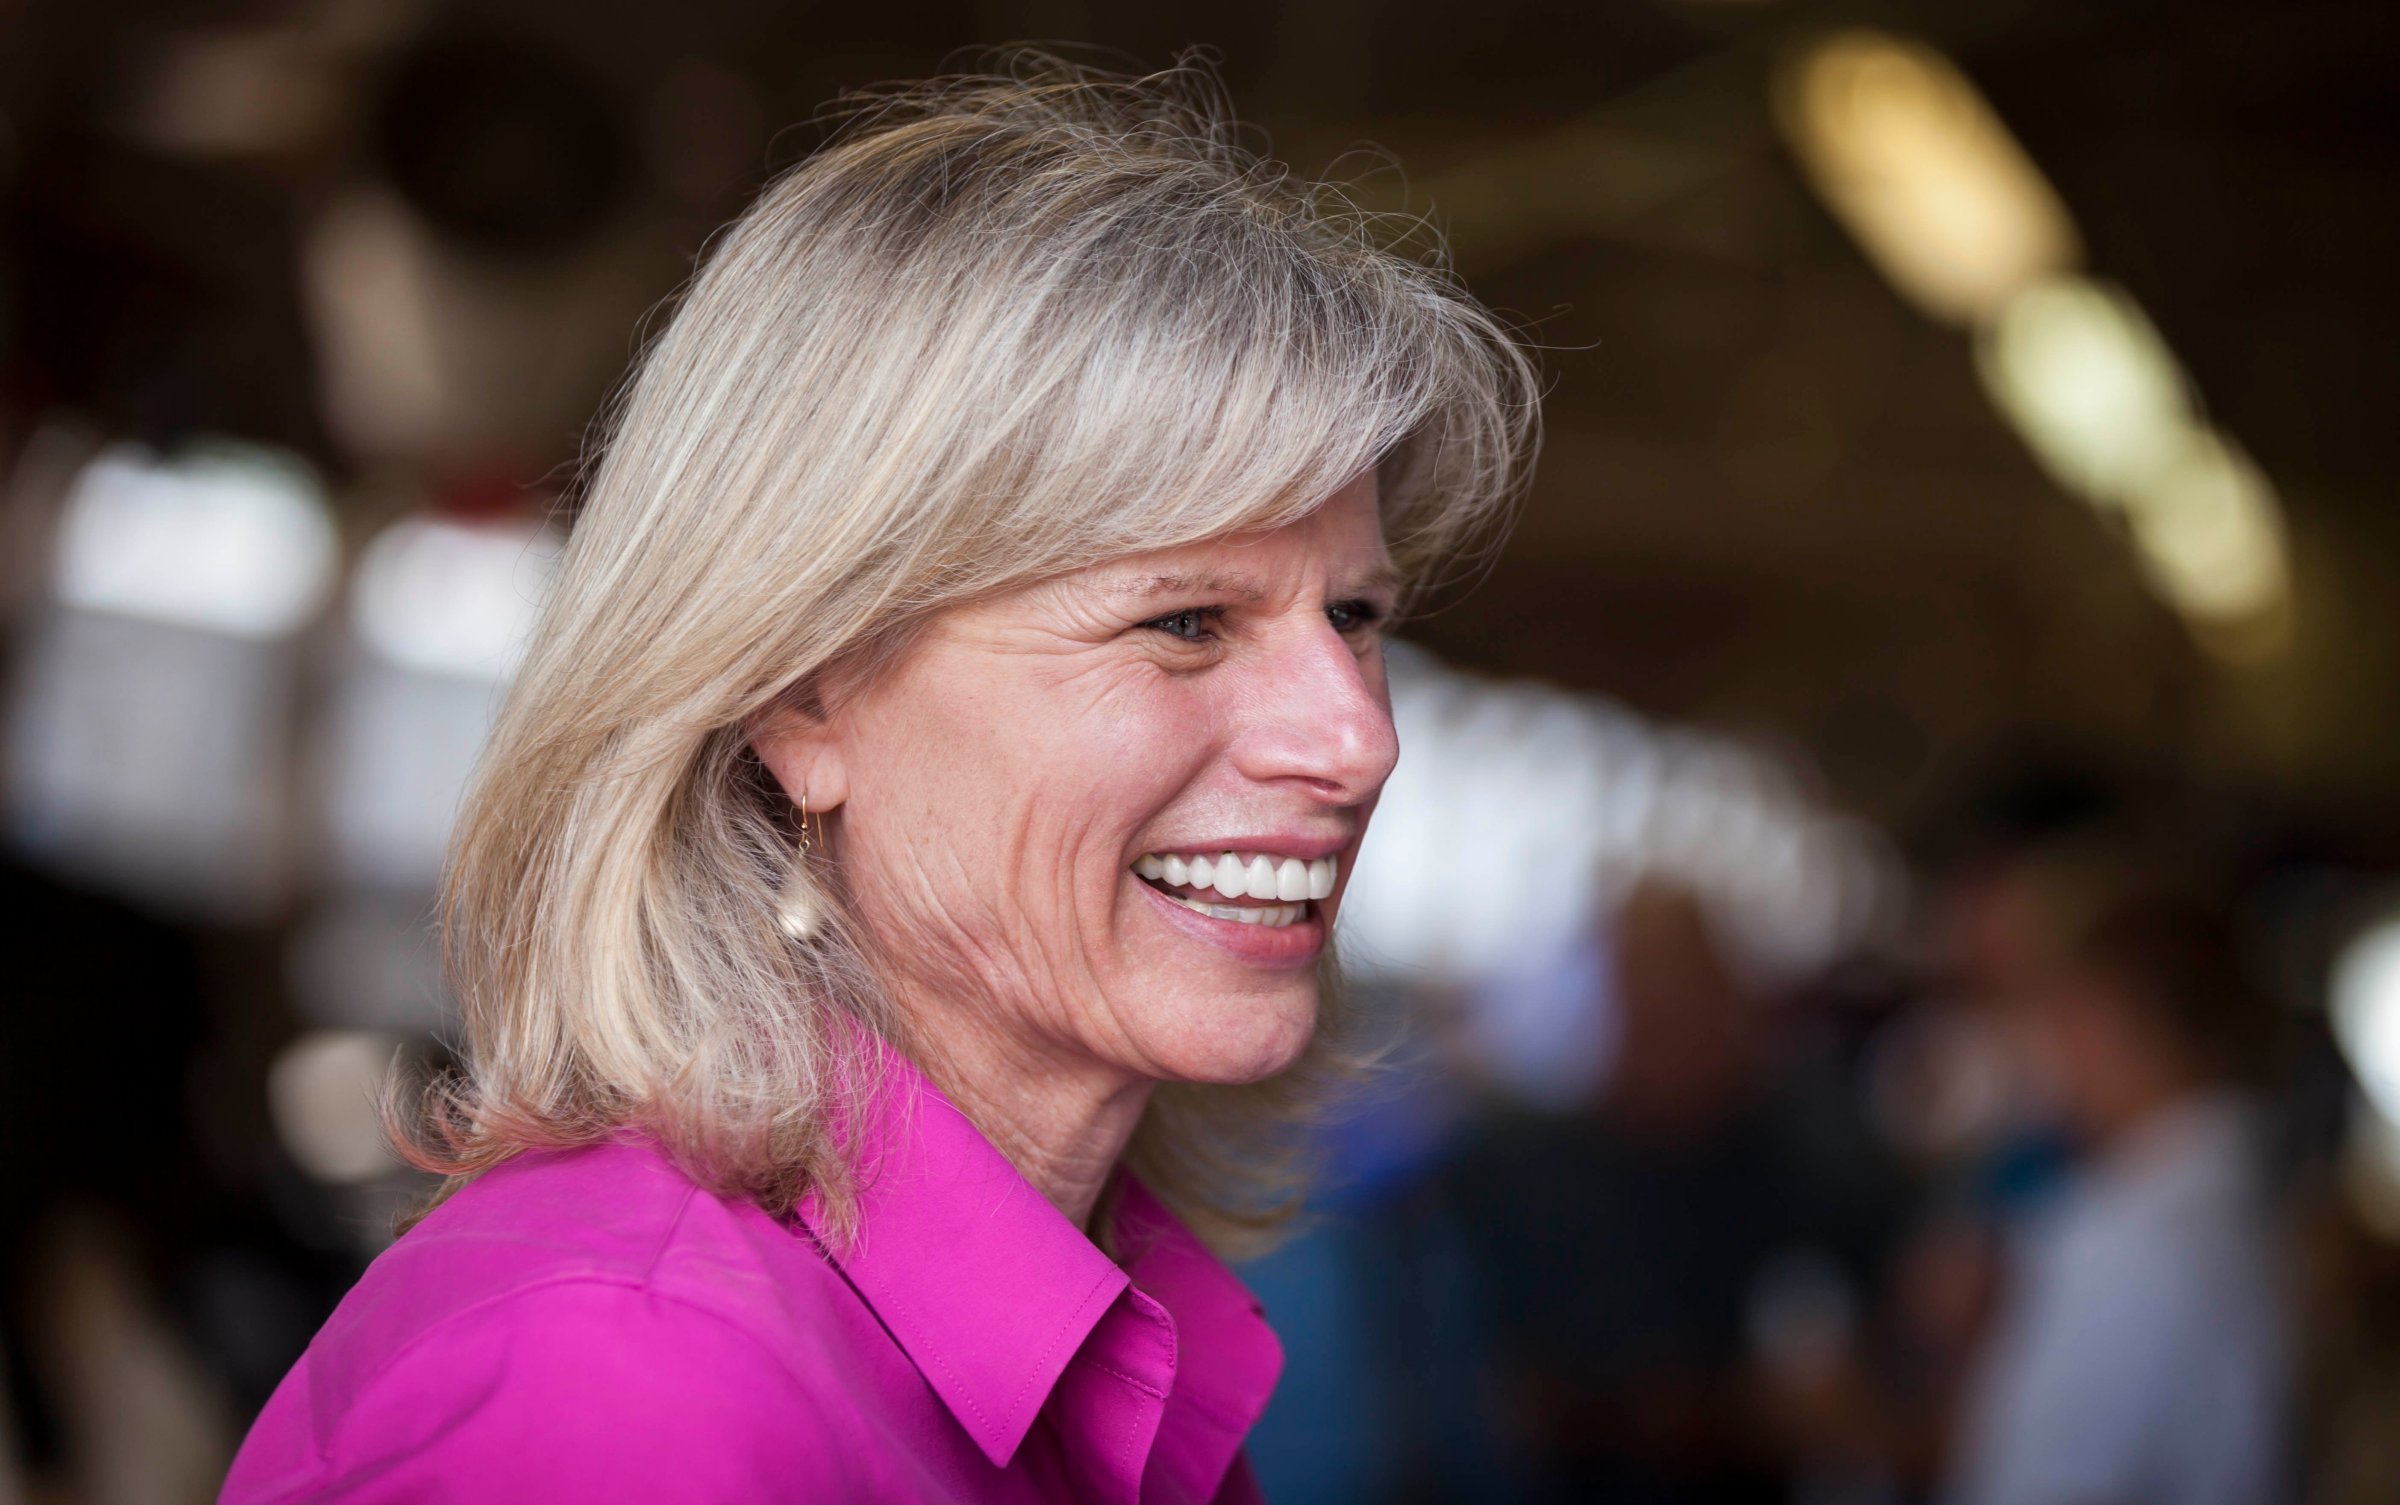 Wisconsin democratic gubernatorial candidate Mary Burke at the Rock County 4-H Fair on July 24, 2014, in Janesville, Wis.